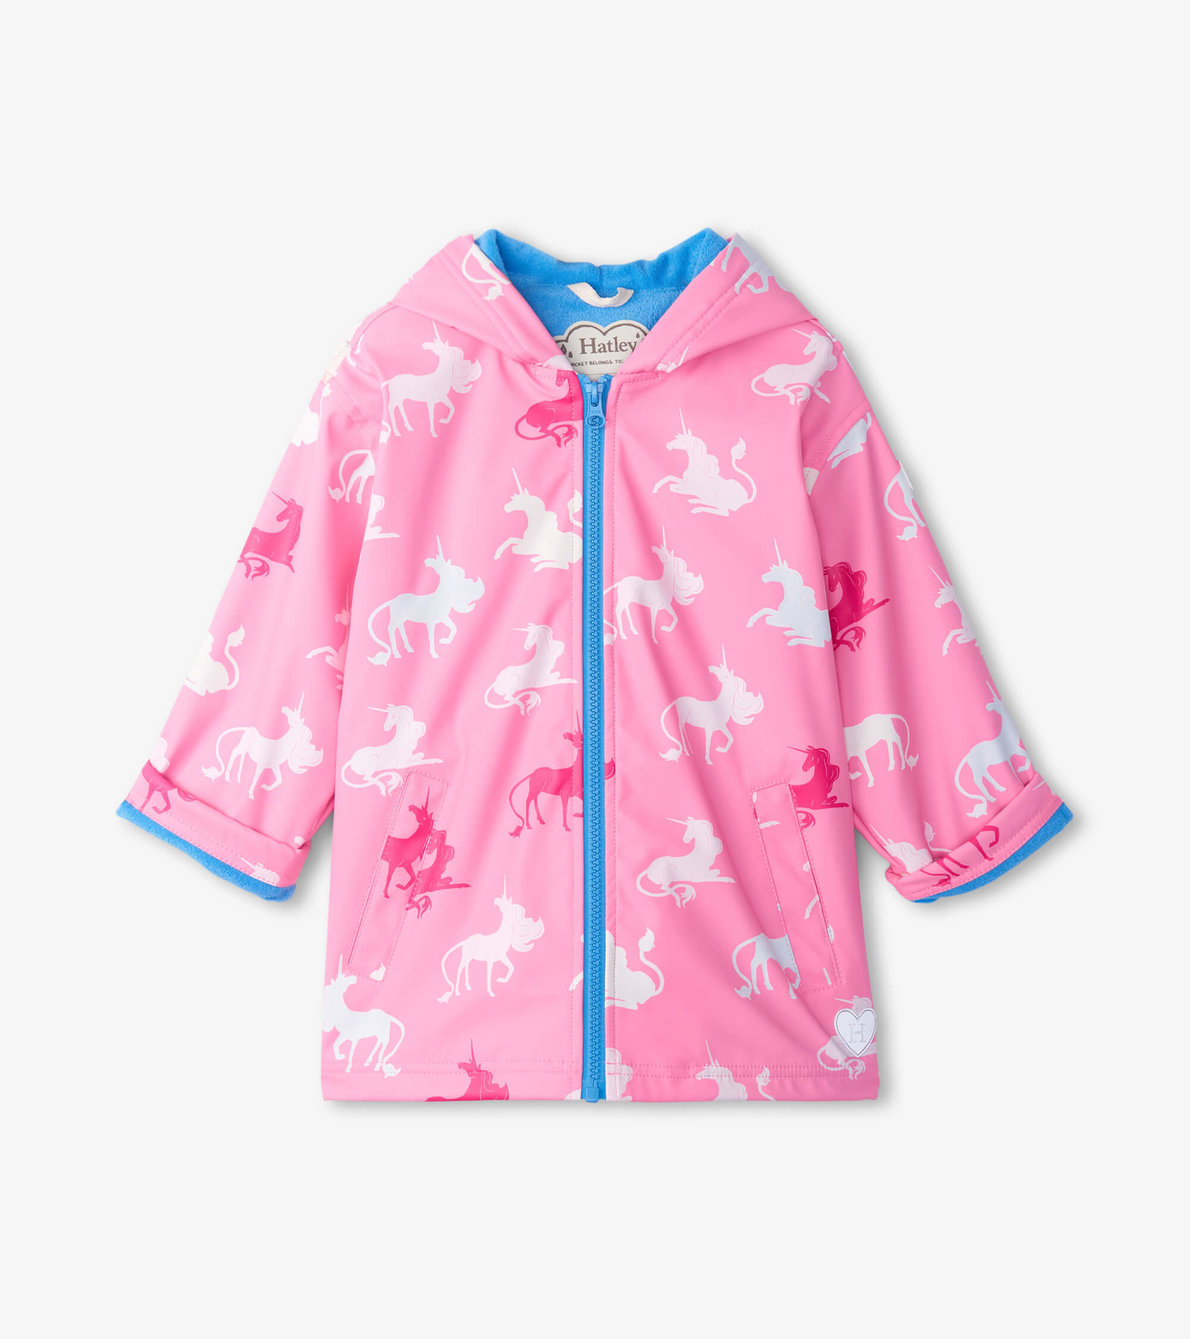 View larger image of Girls Mystical Colour Changing Zip-Up Raincoat